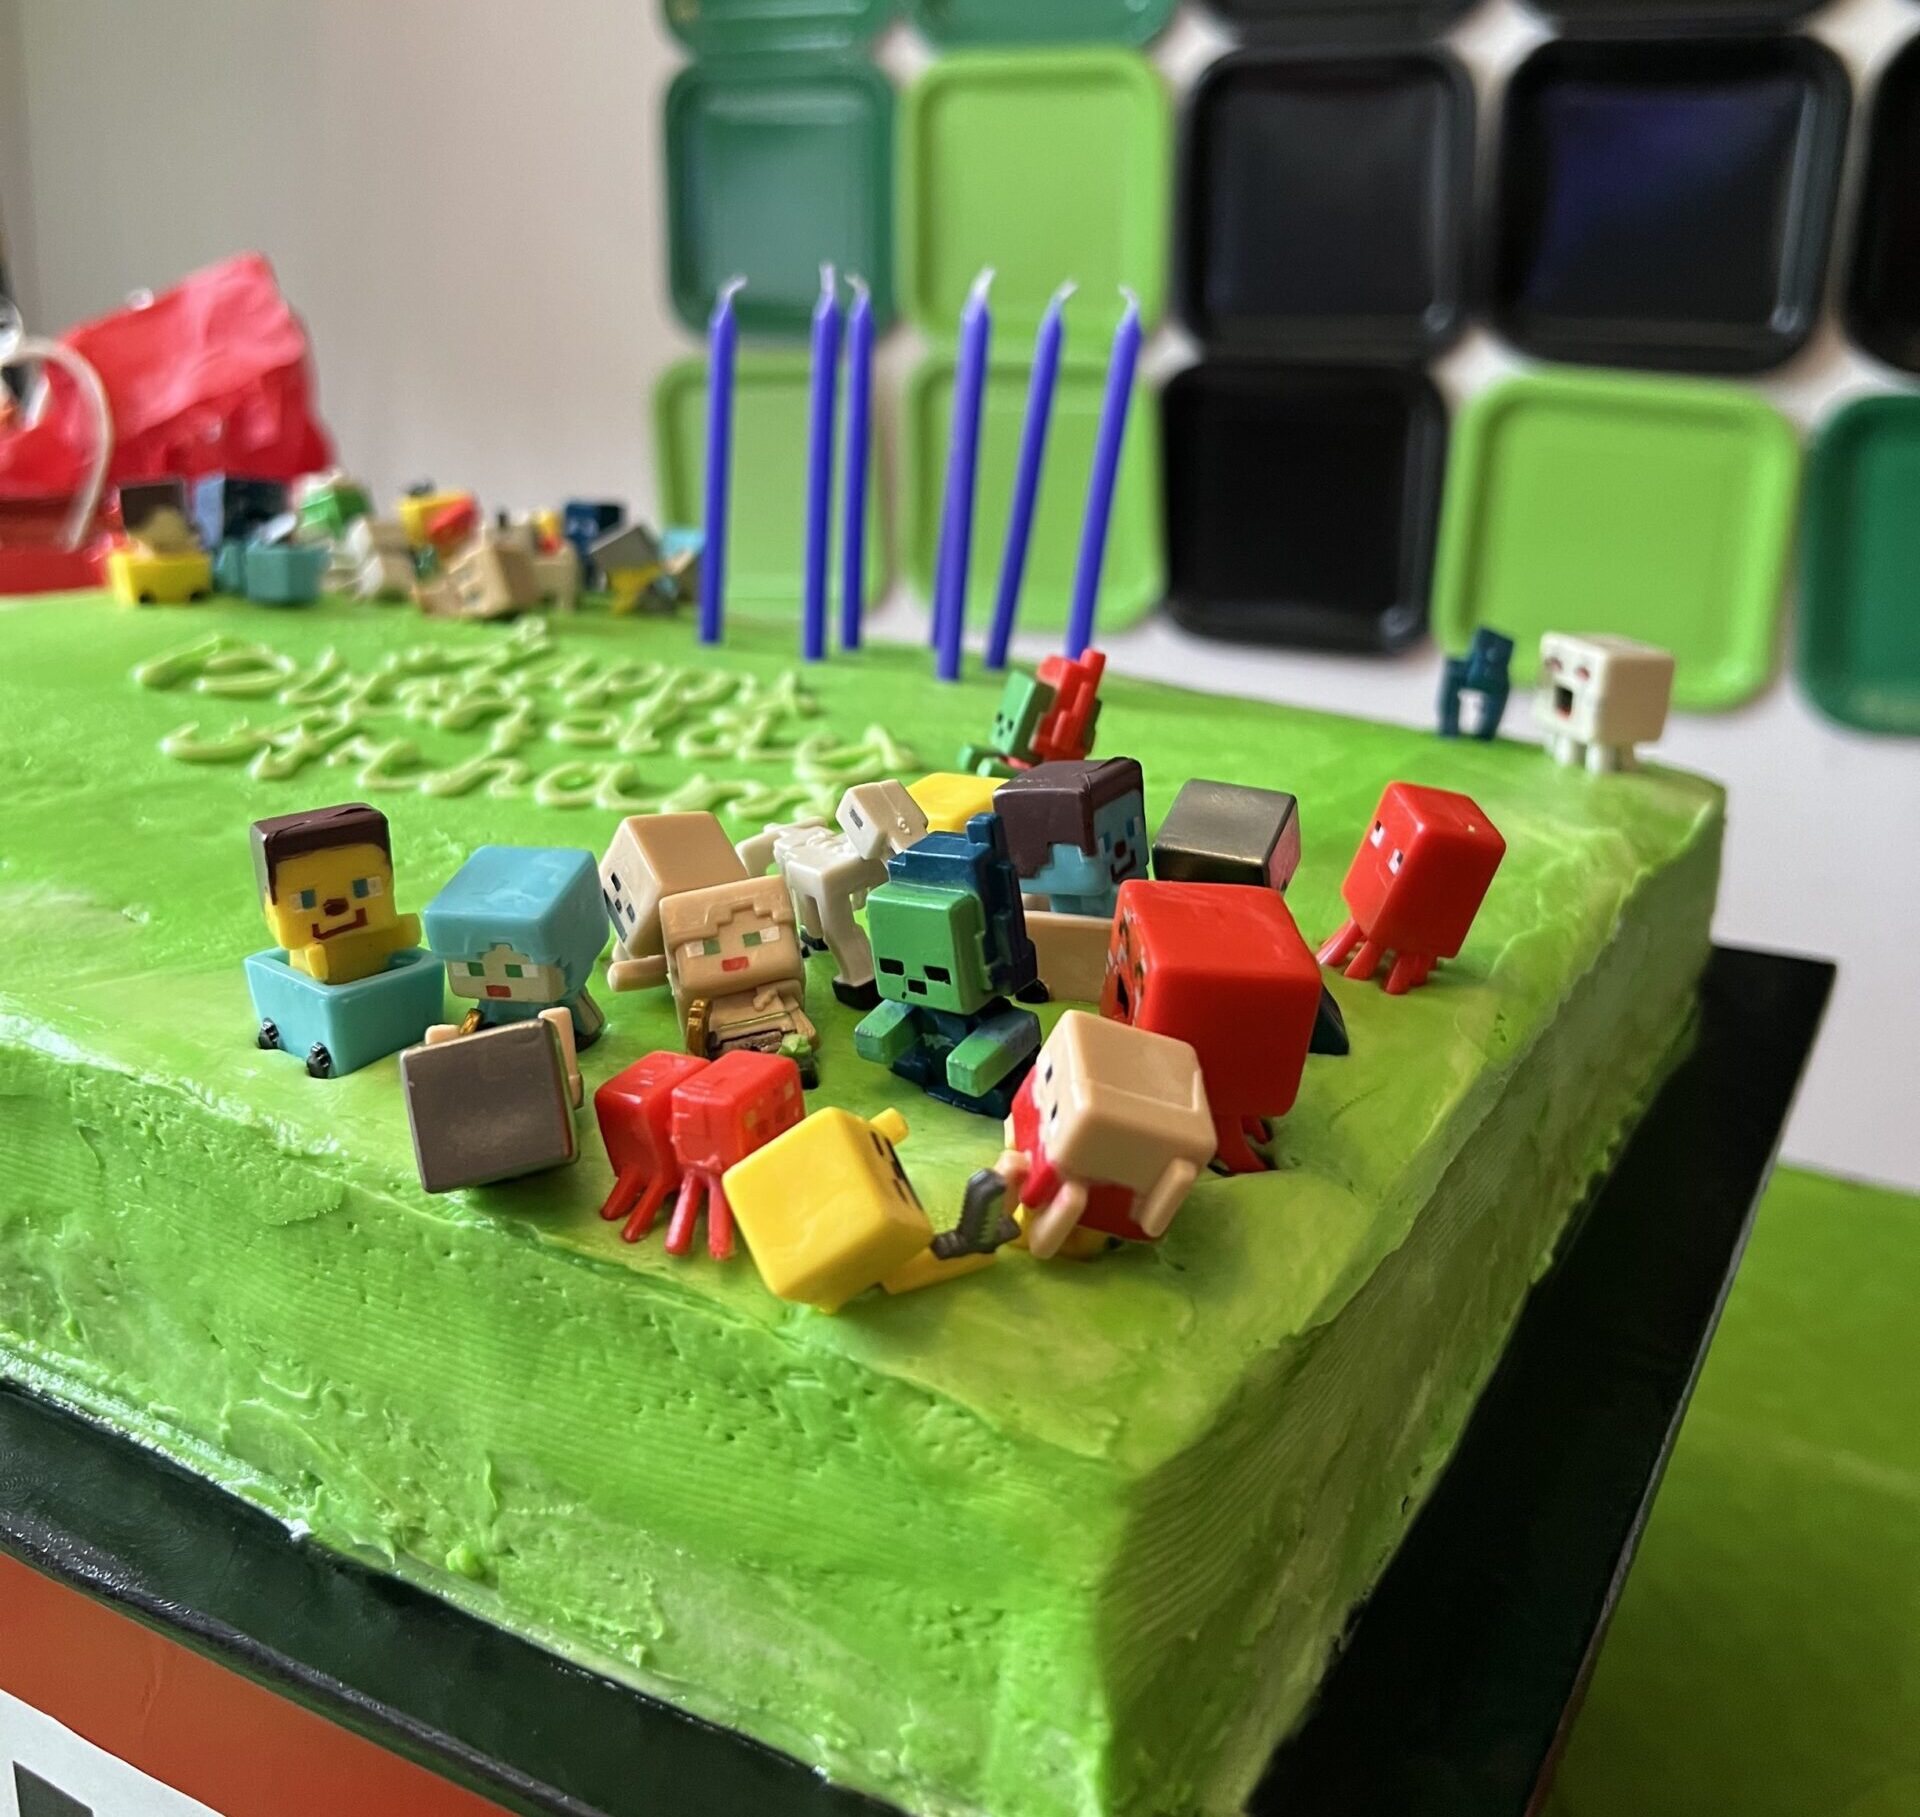 Khadija Mubasher specializes in creating custom Minecraft birthday cakes. Whether you're hosting a pixelated themed party or surprising a Minecraft enthusiast, Khadija's Minecraft birthday cake creations are